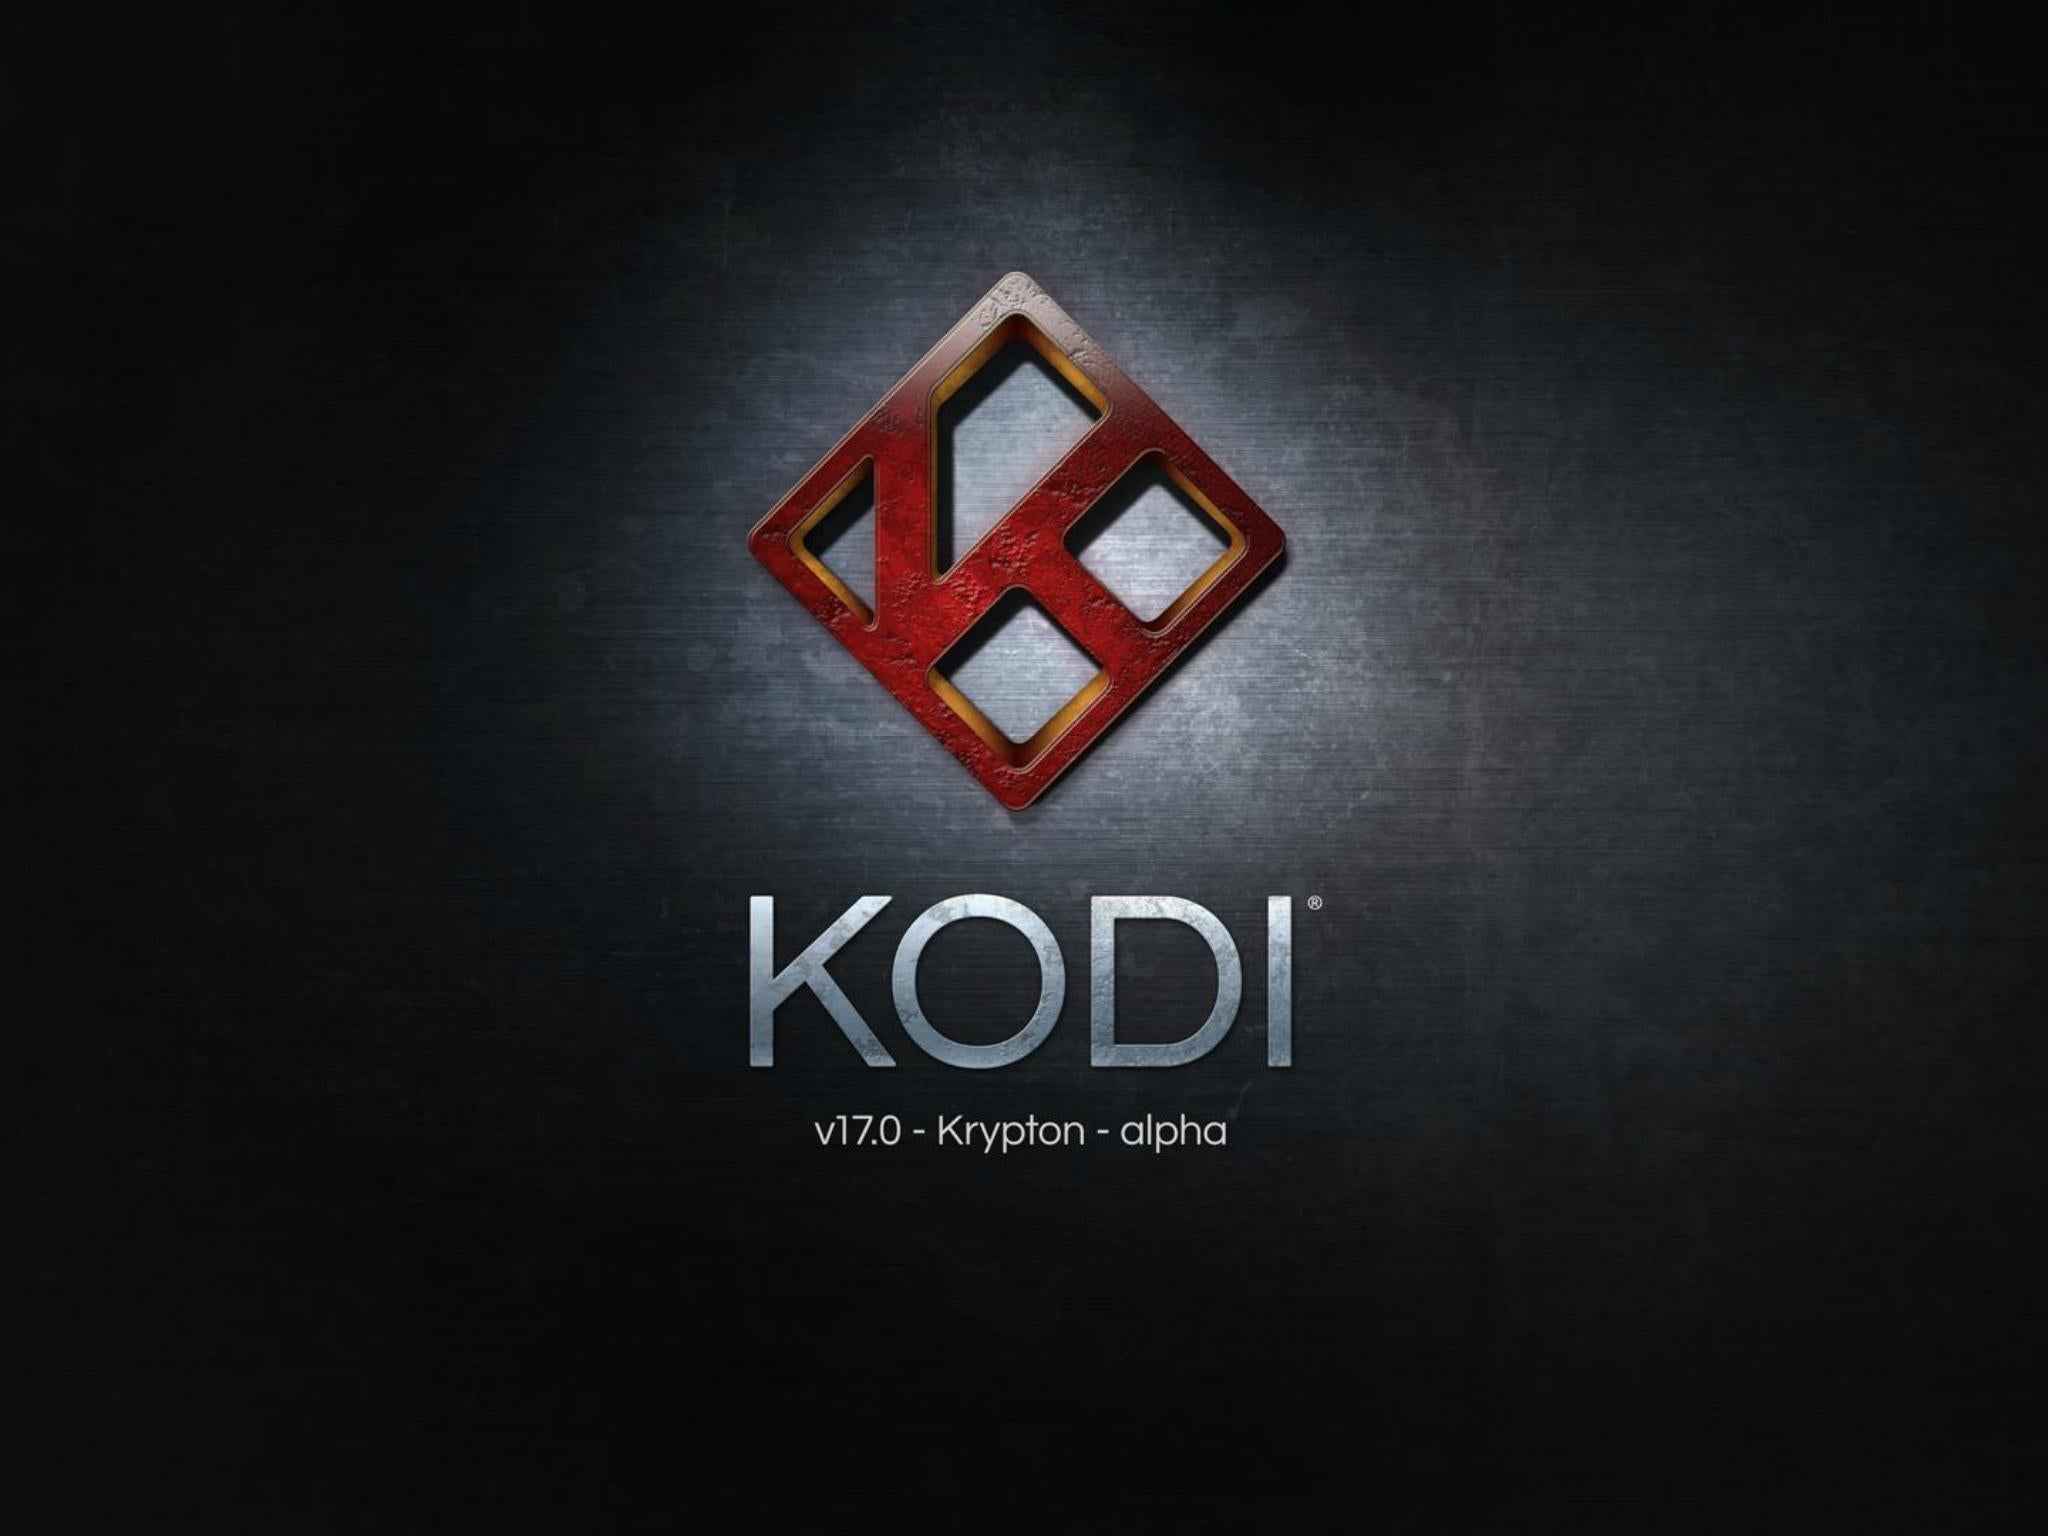 Kodi has been critical of sites and repositories that promote the use of illegal add-ons